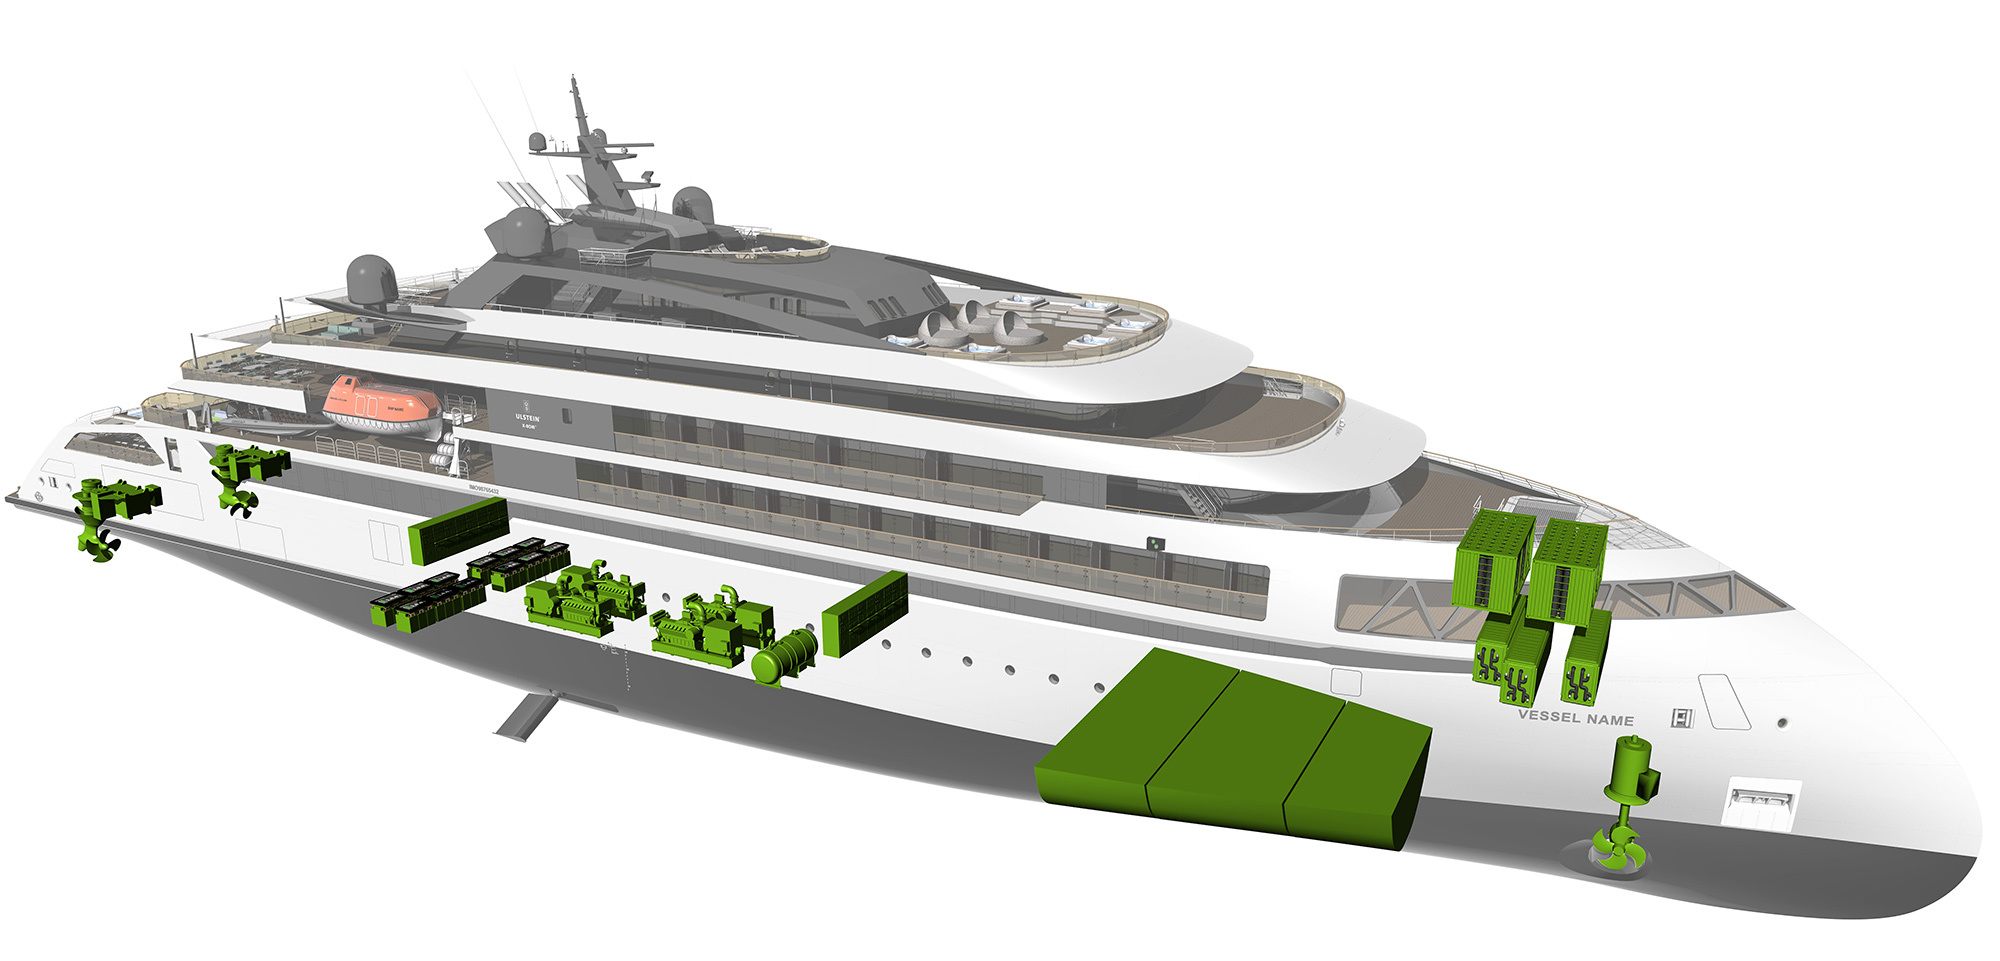 The ULSTEIN CX129 expedition cruise vessel design with power sources including batteries, methanol/MGO and hydrogen.